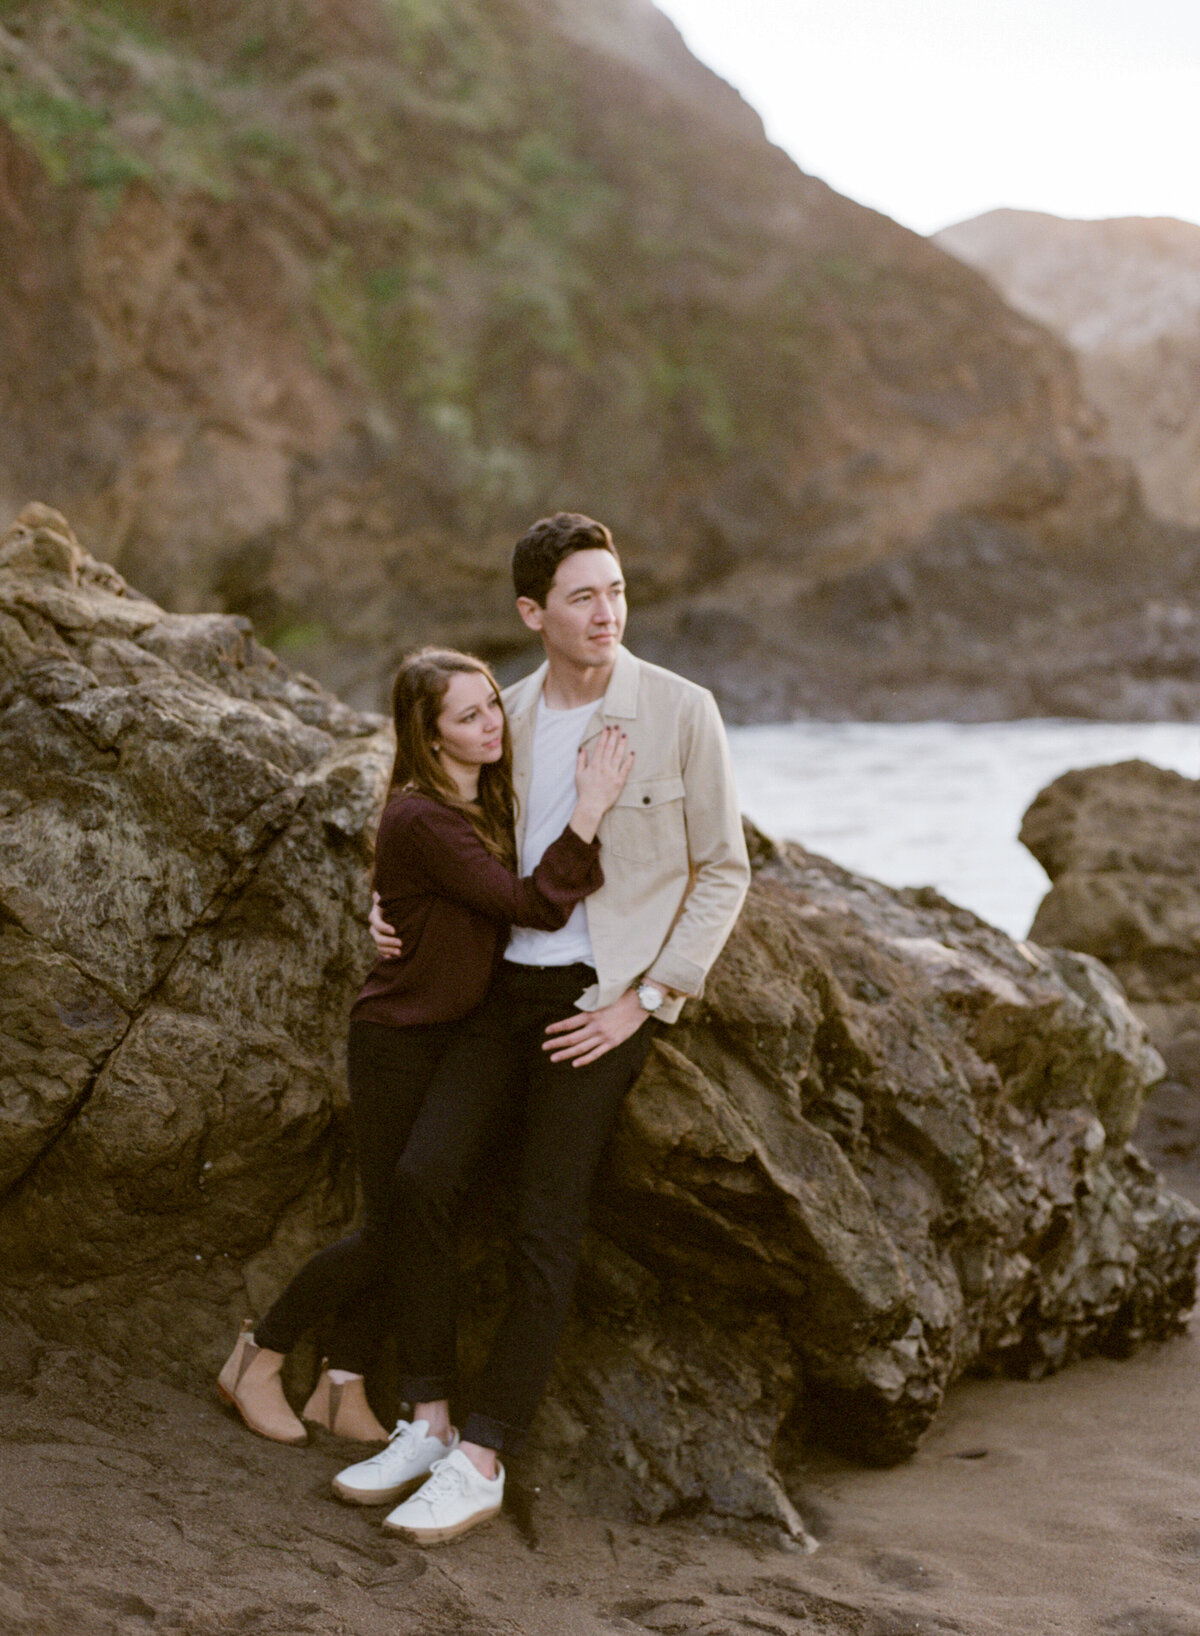 Erin + Kevin San Francisco Land's End Sutro Baths Rodeo Lagoon Beach Engagement Session Cassie Valente Photography 0098